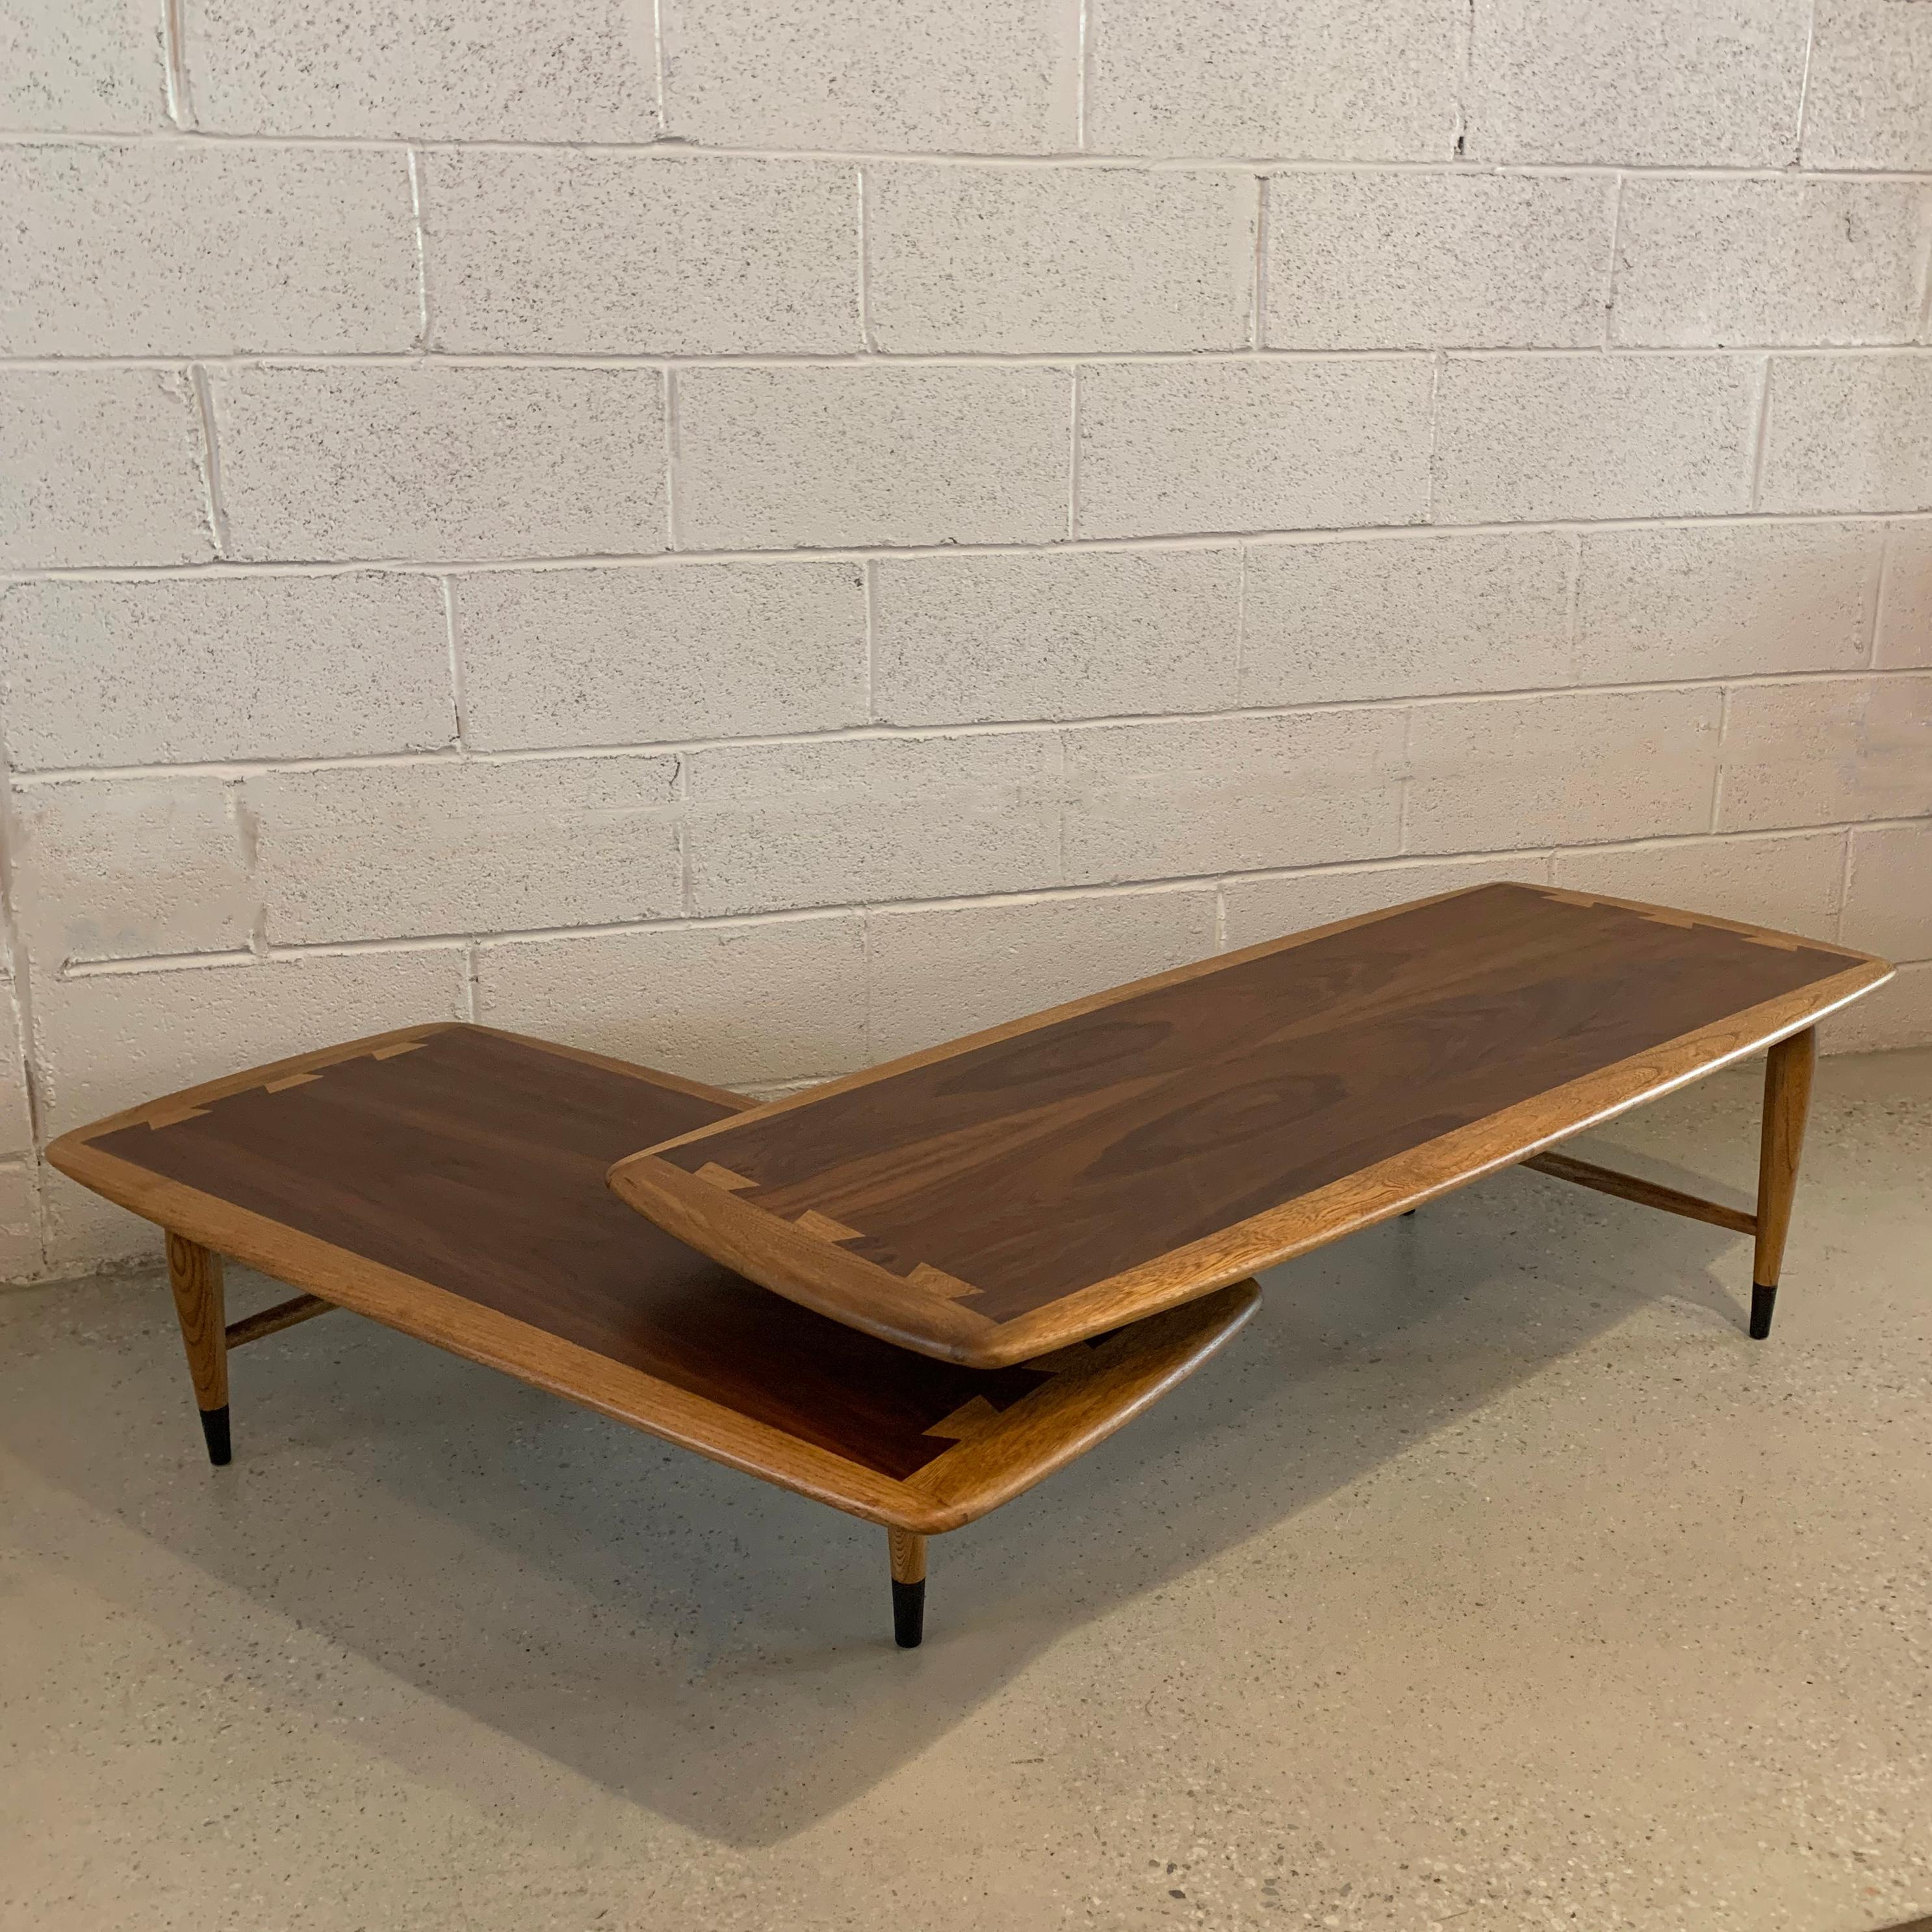 20th Century Mid-Century Modern Switchblade Coffee Table by Lane Acclaim